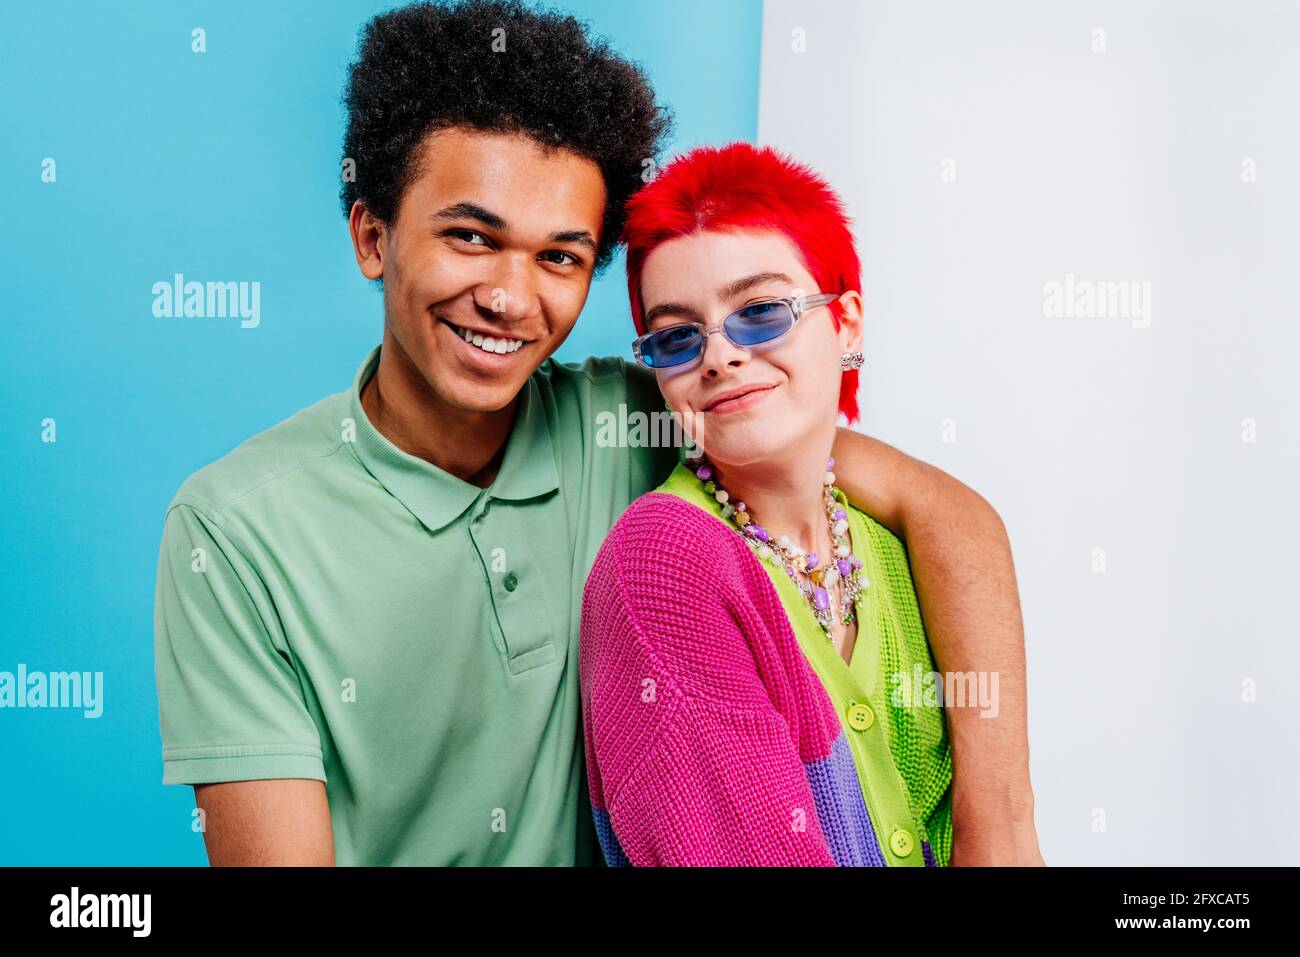 Smiling redhead woman with hand on shoulder of male friend on blue and white background Stock Photo